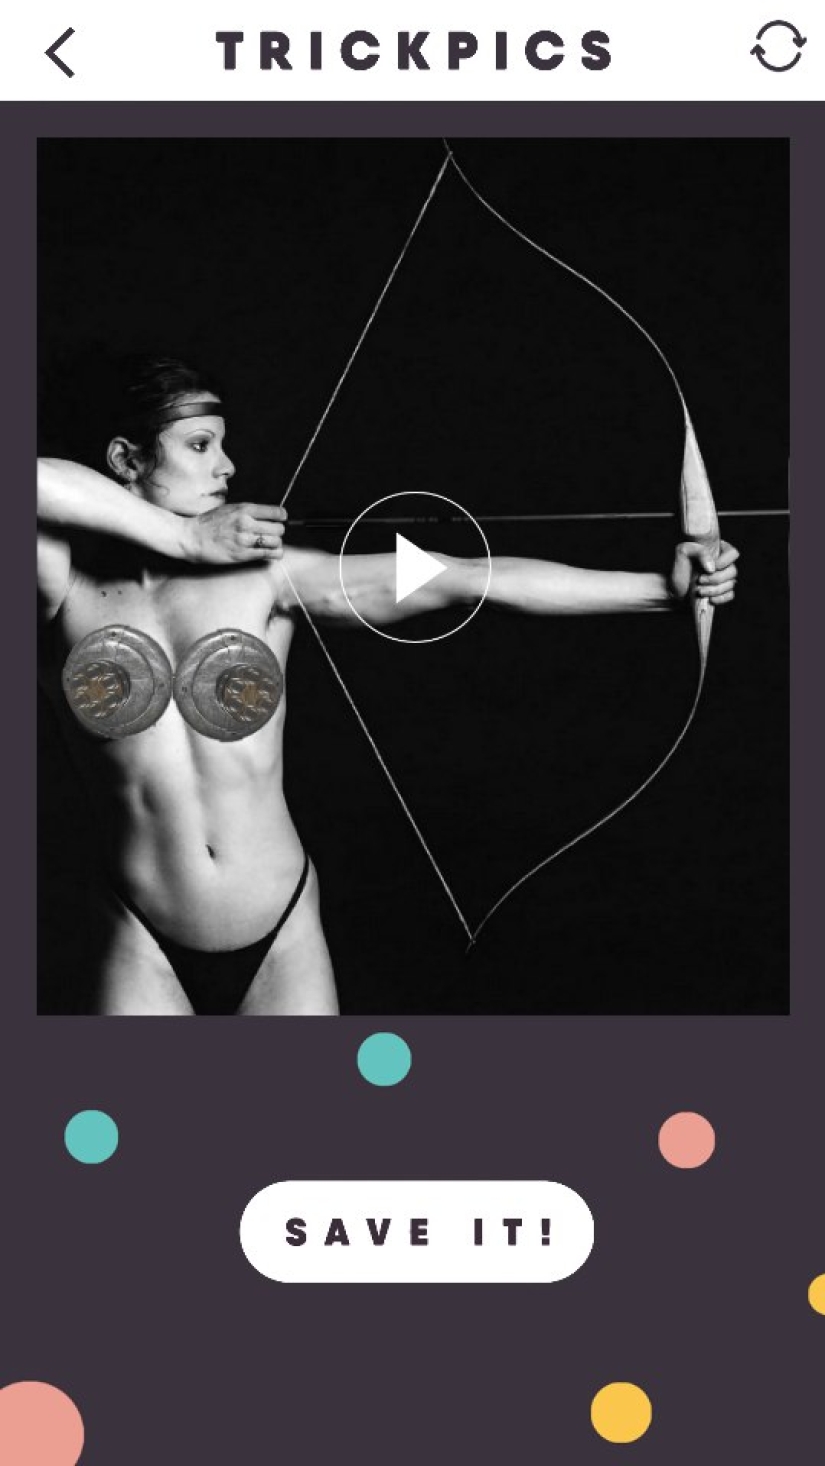 PornHub has released an application with stickers for intimate parts of the body